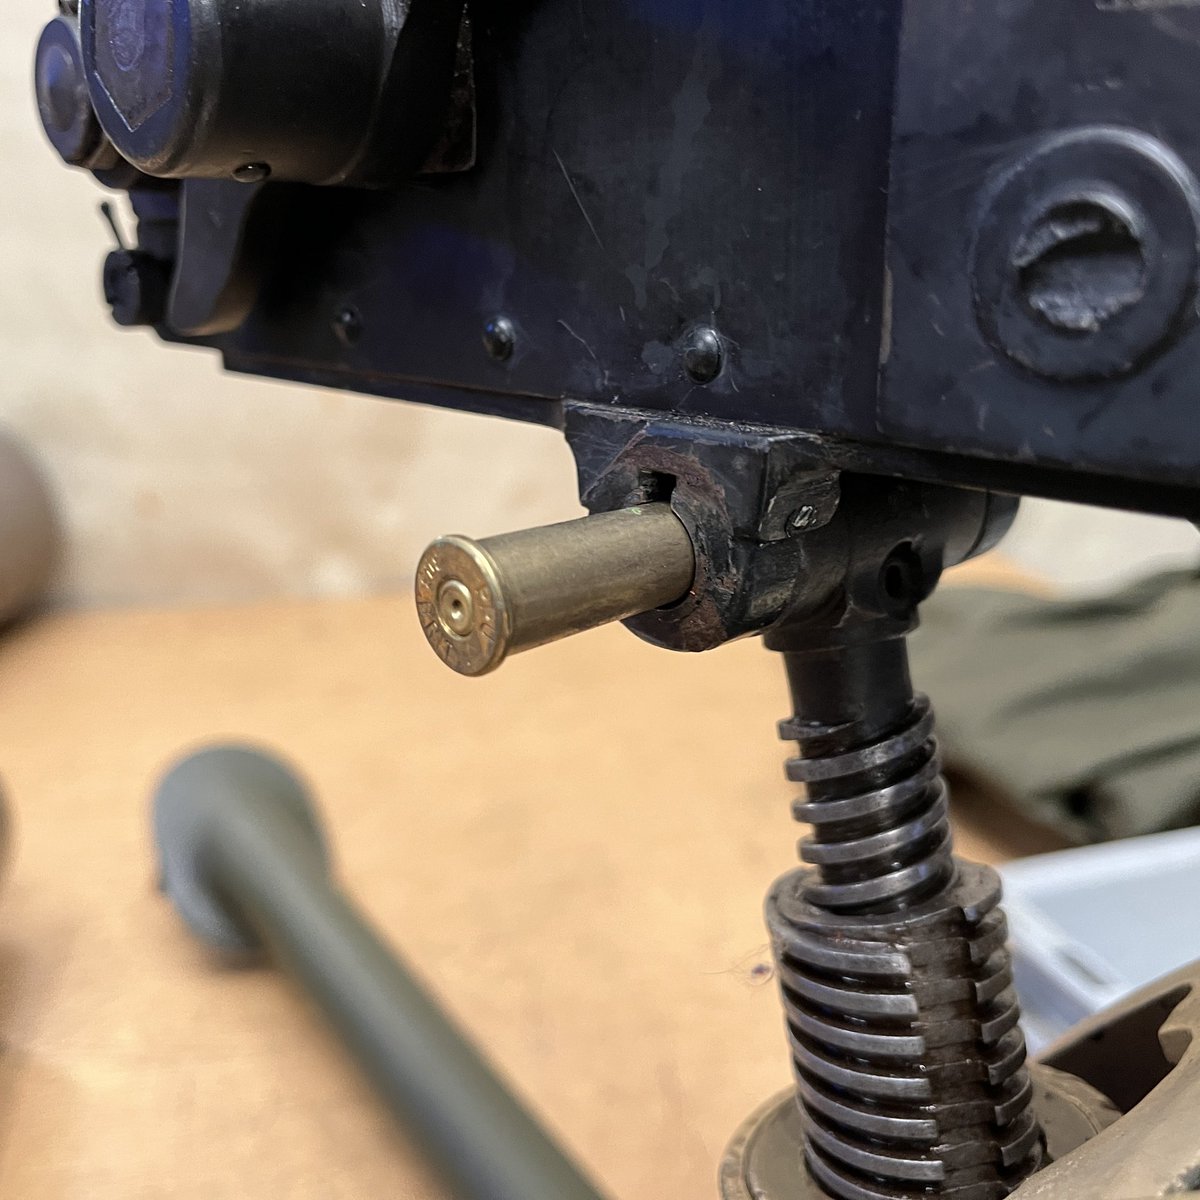 Can’t find your elevating gear fixing pin? #makedoandmend #vickersmg #rule303